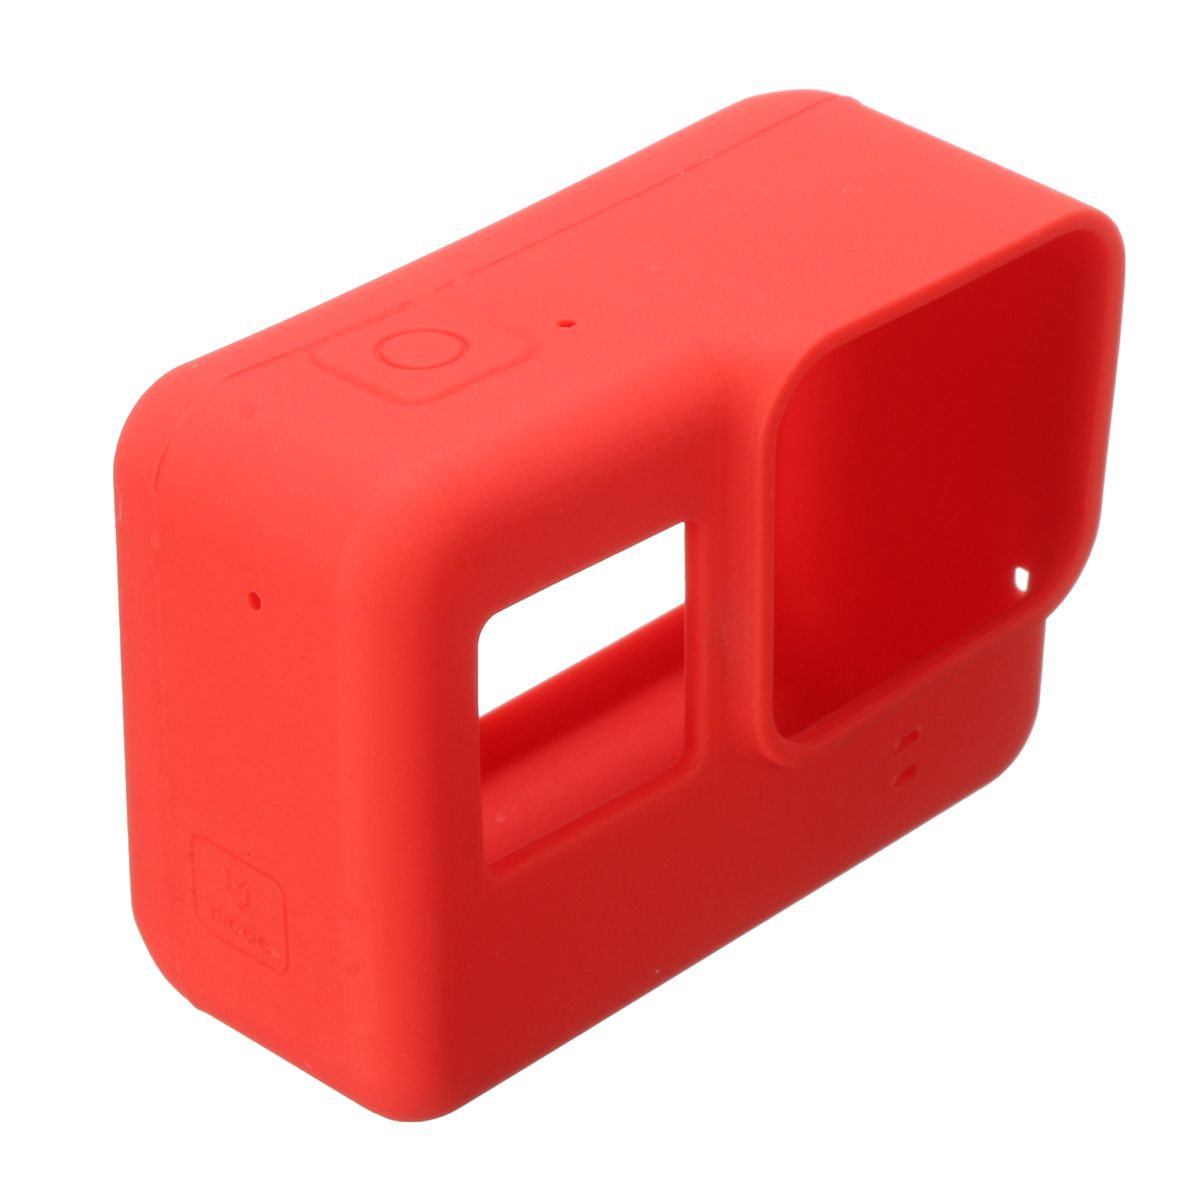 Soft-Silicone-Housing-Case-Protective-Cover-And-Lens-Cap-For-GoPro-Hero-5-Camera-1109058